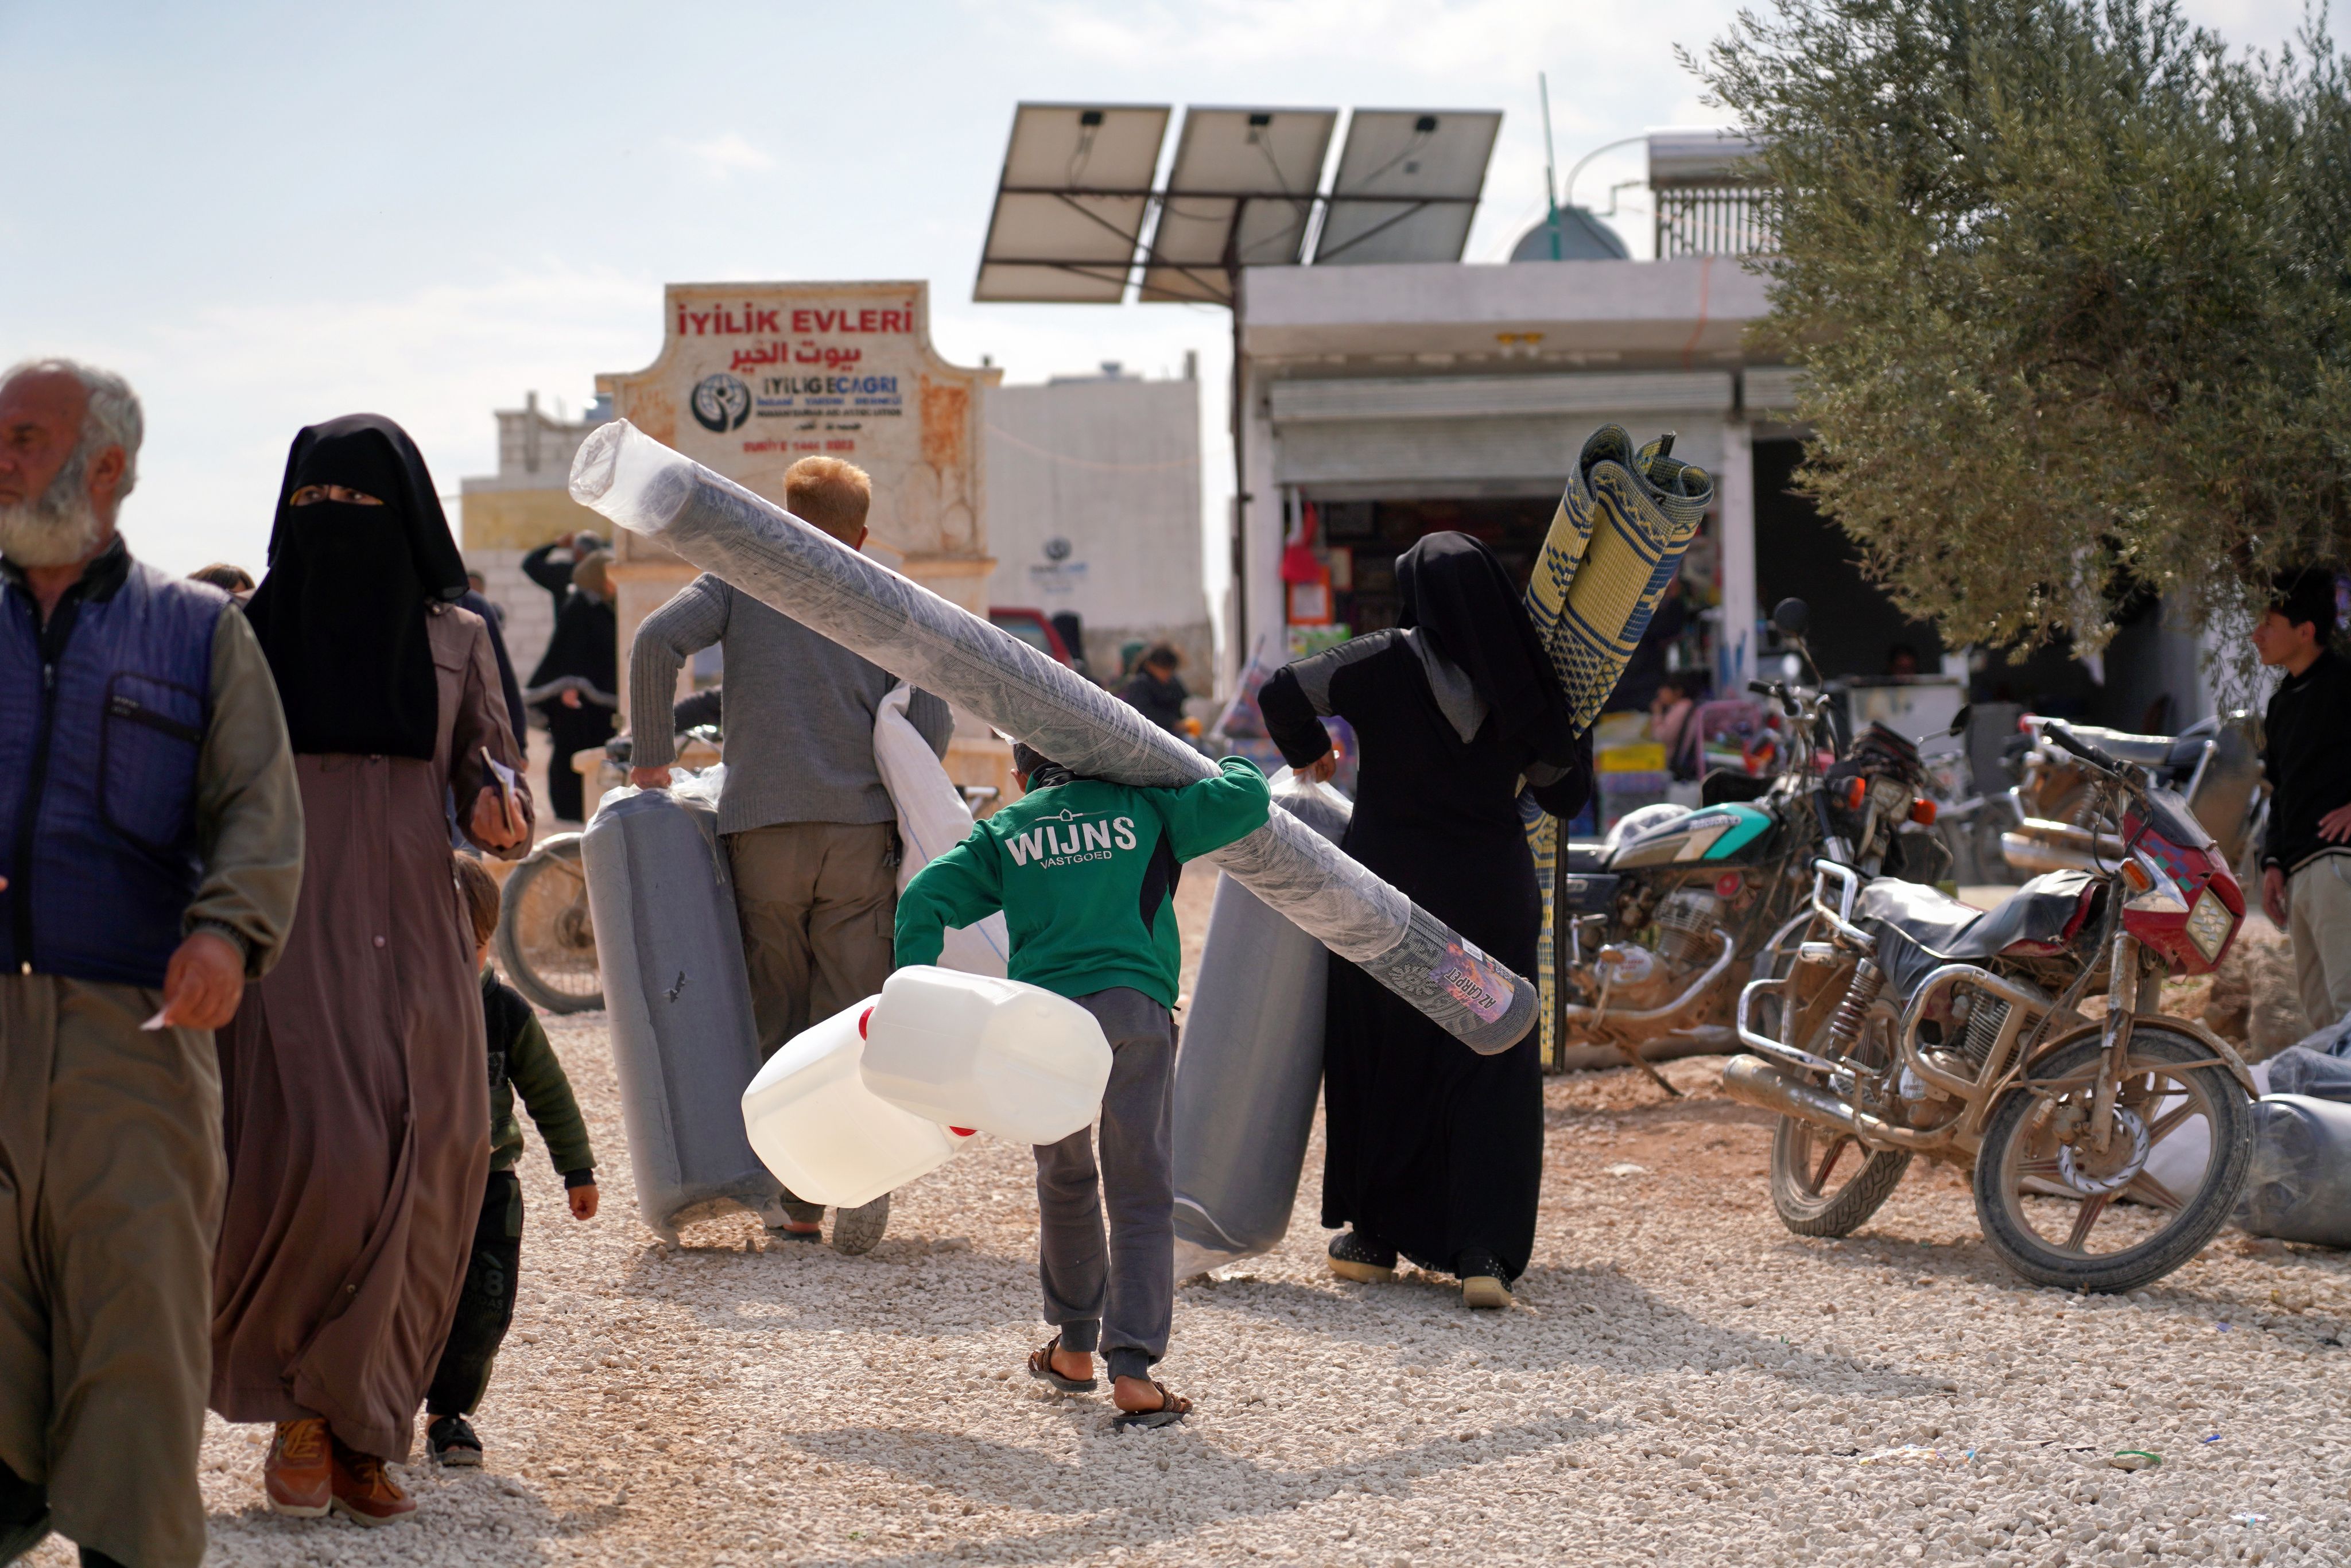 Essential items like blankets, water containers and mattresses are delivered to earthquake survivors in Syria